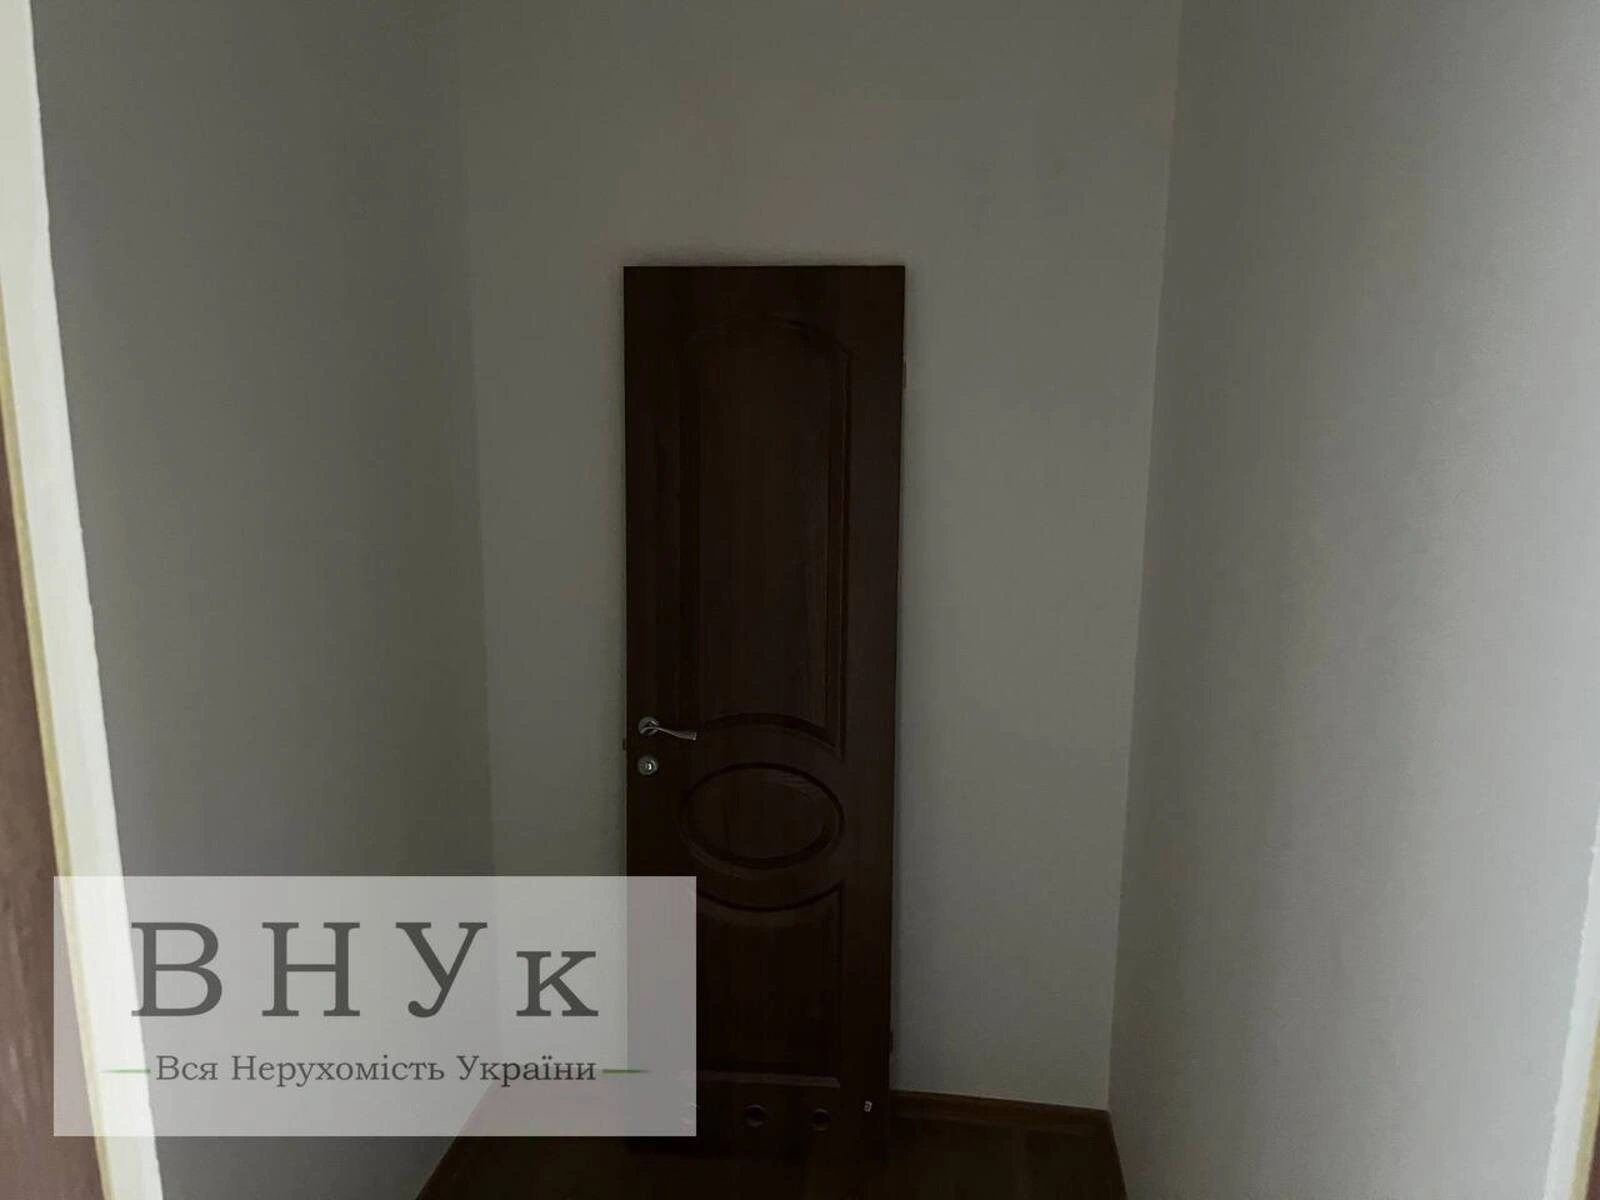 Apartments for sale. 1 room, 41 m², 9th floor/9 floors. Smakuly vul., Ternopil. 